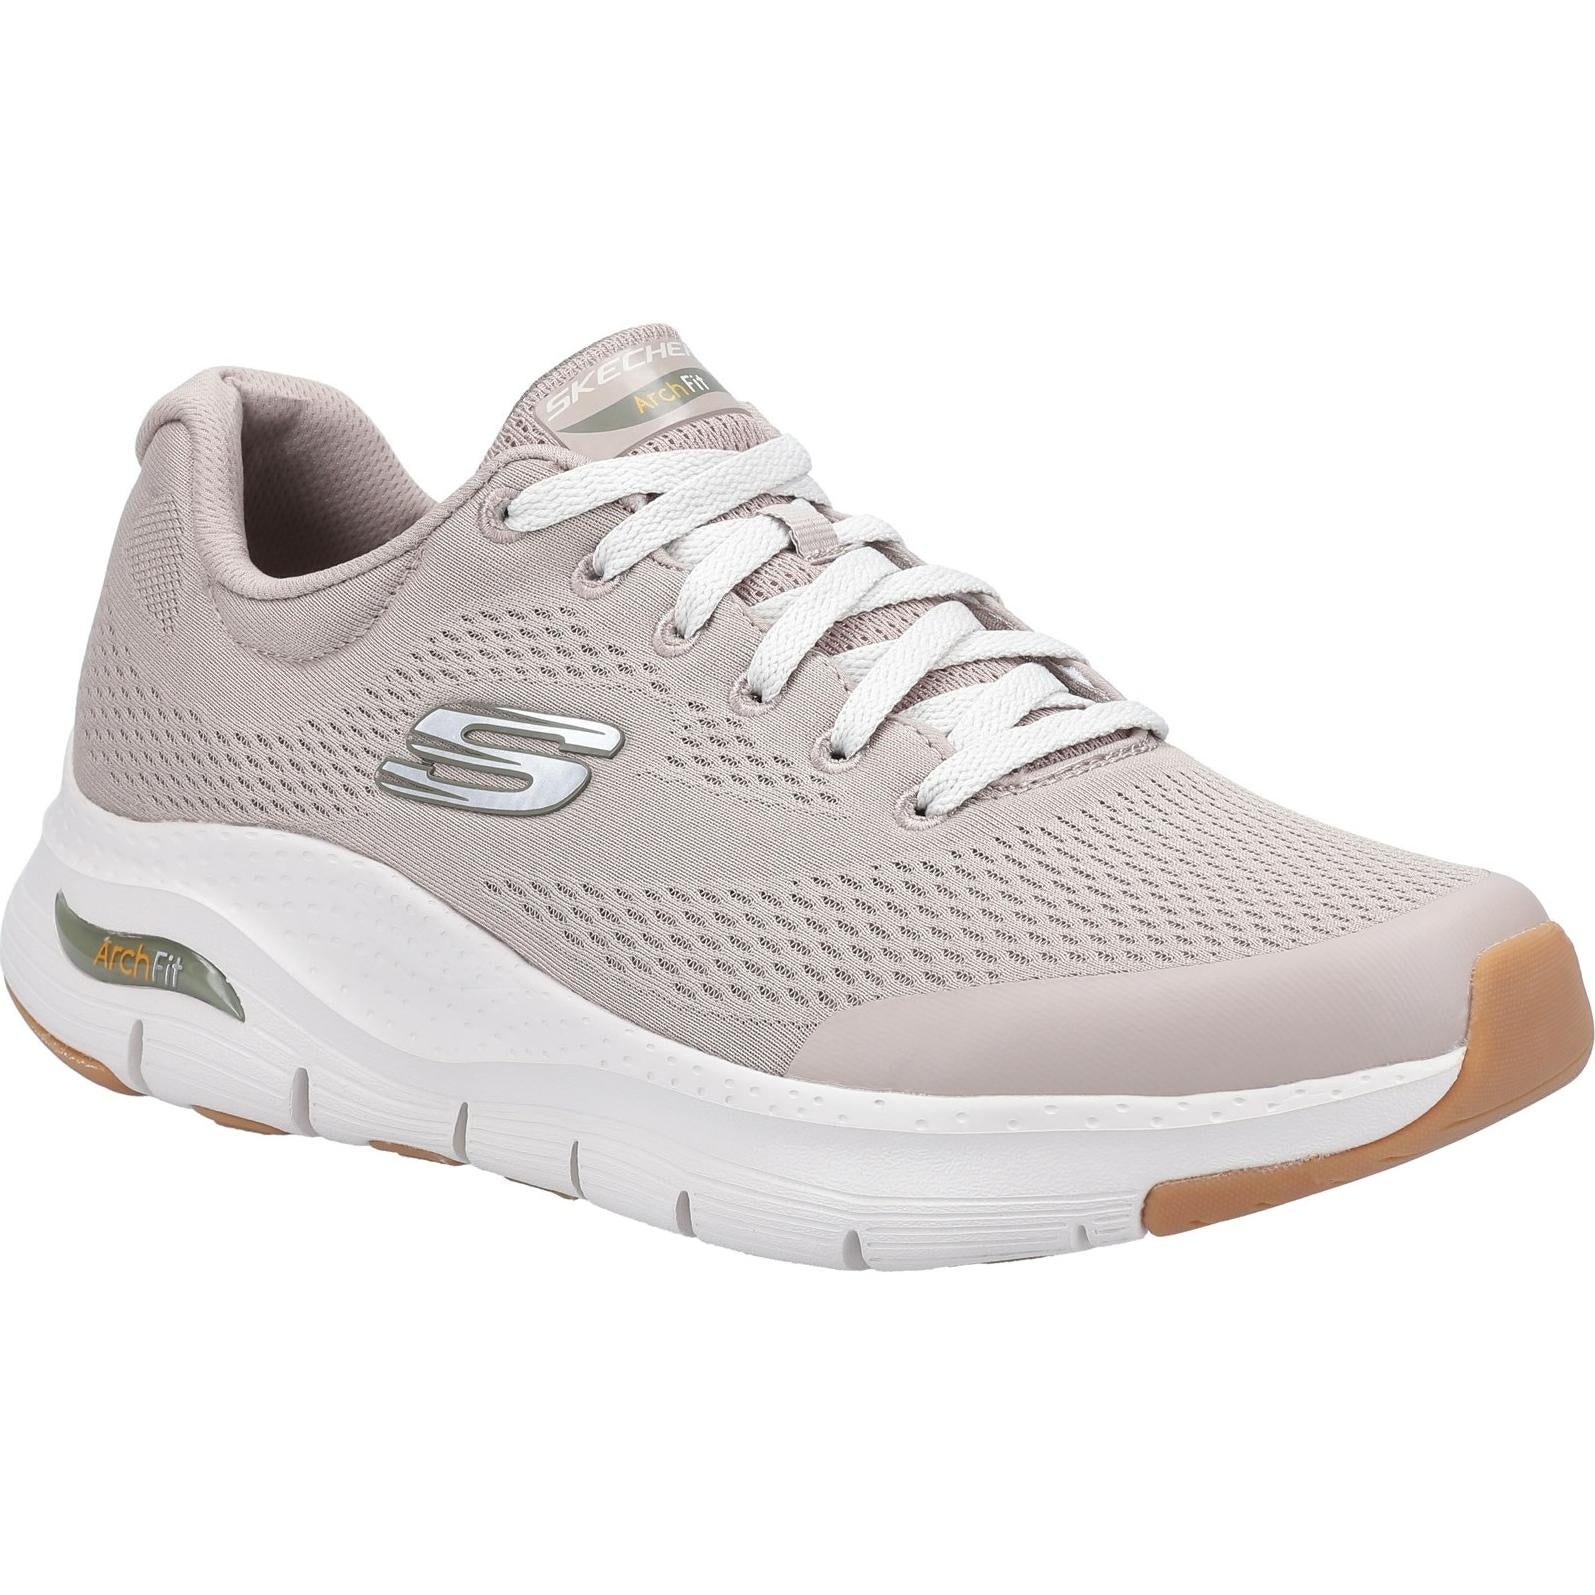 Skechers Arch Fit Sports Trainers